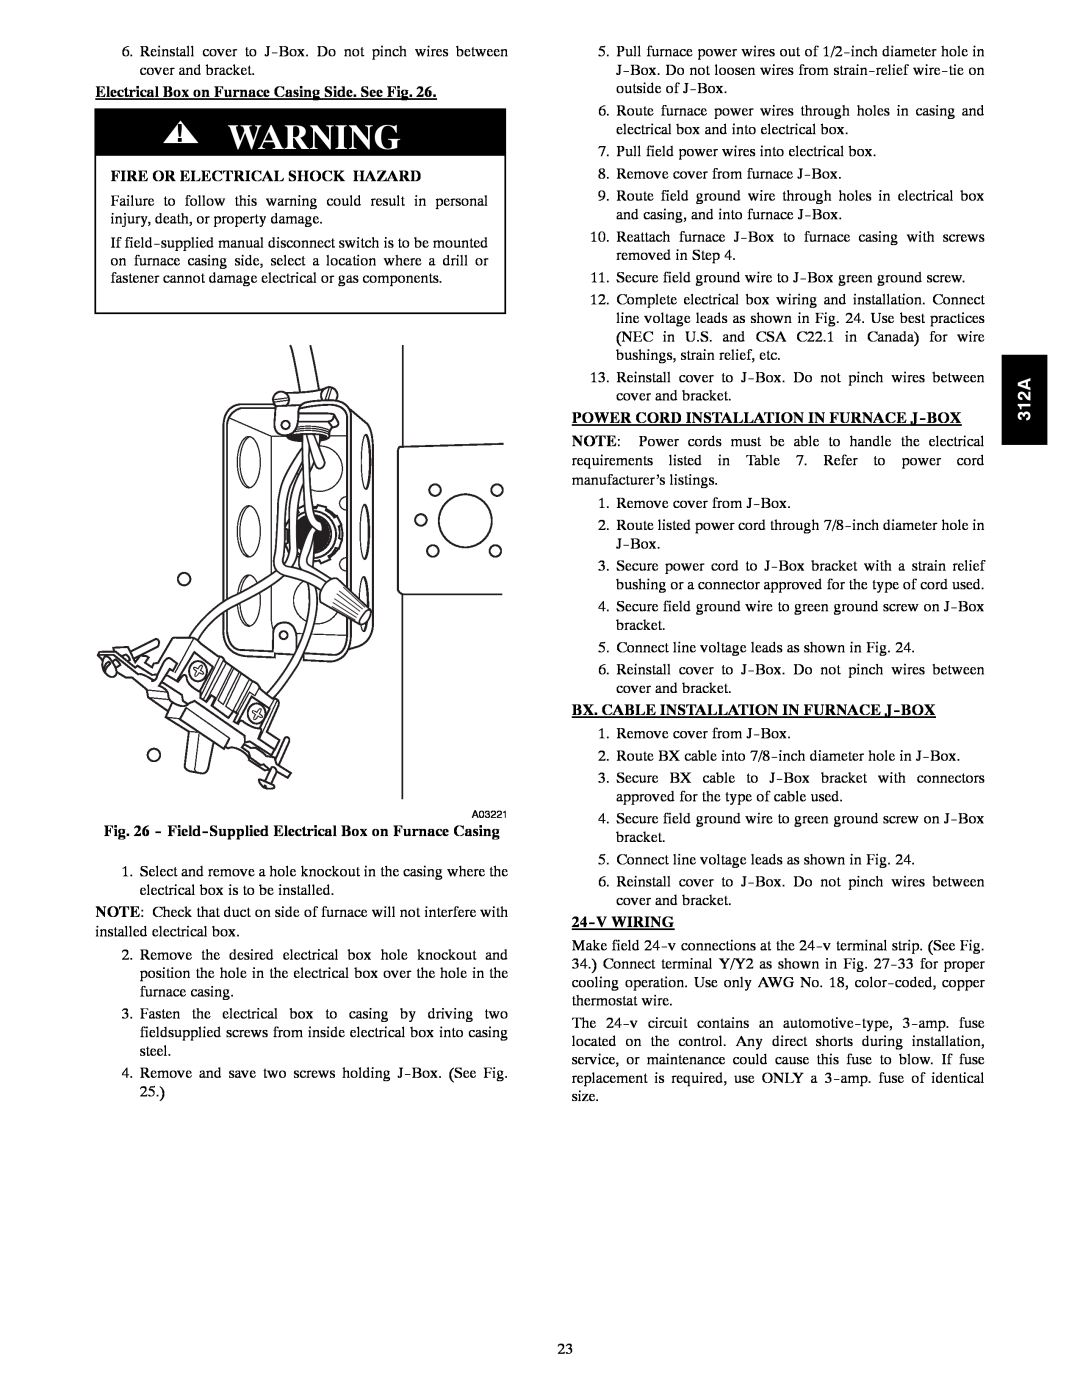 Bryant 120 Electrical Box on Furnace Casing Side. See Fig, Fire Or Electrical Shock Hazard, Vwiring, 312A 